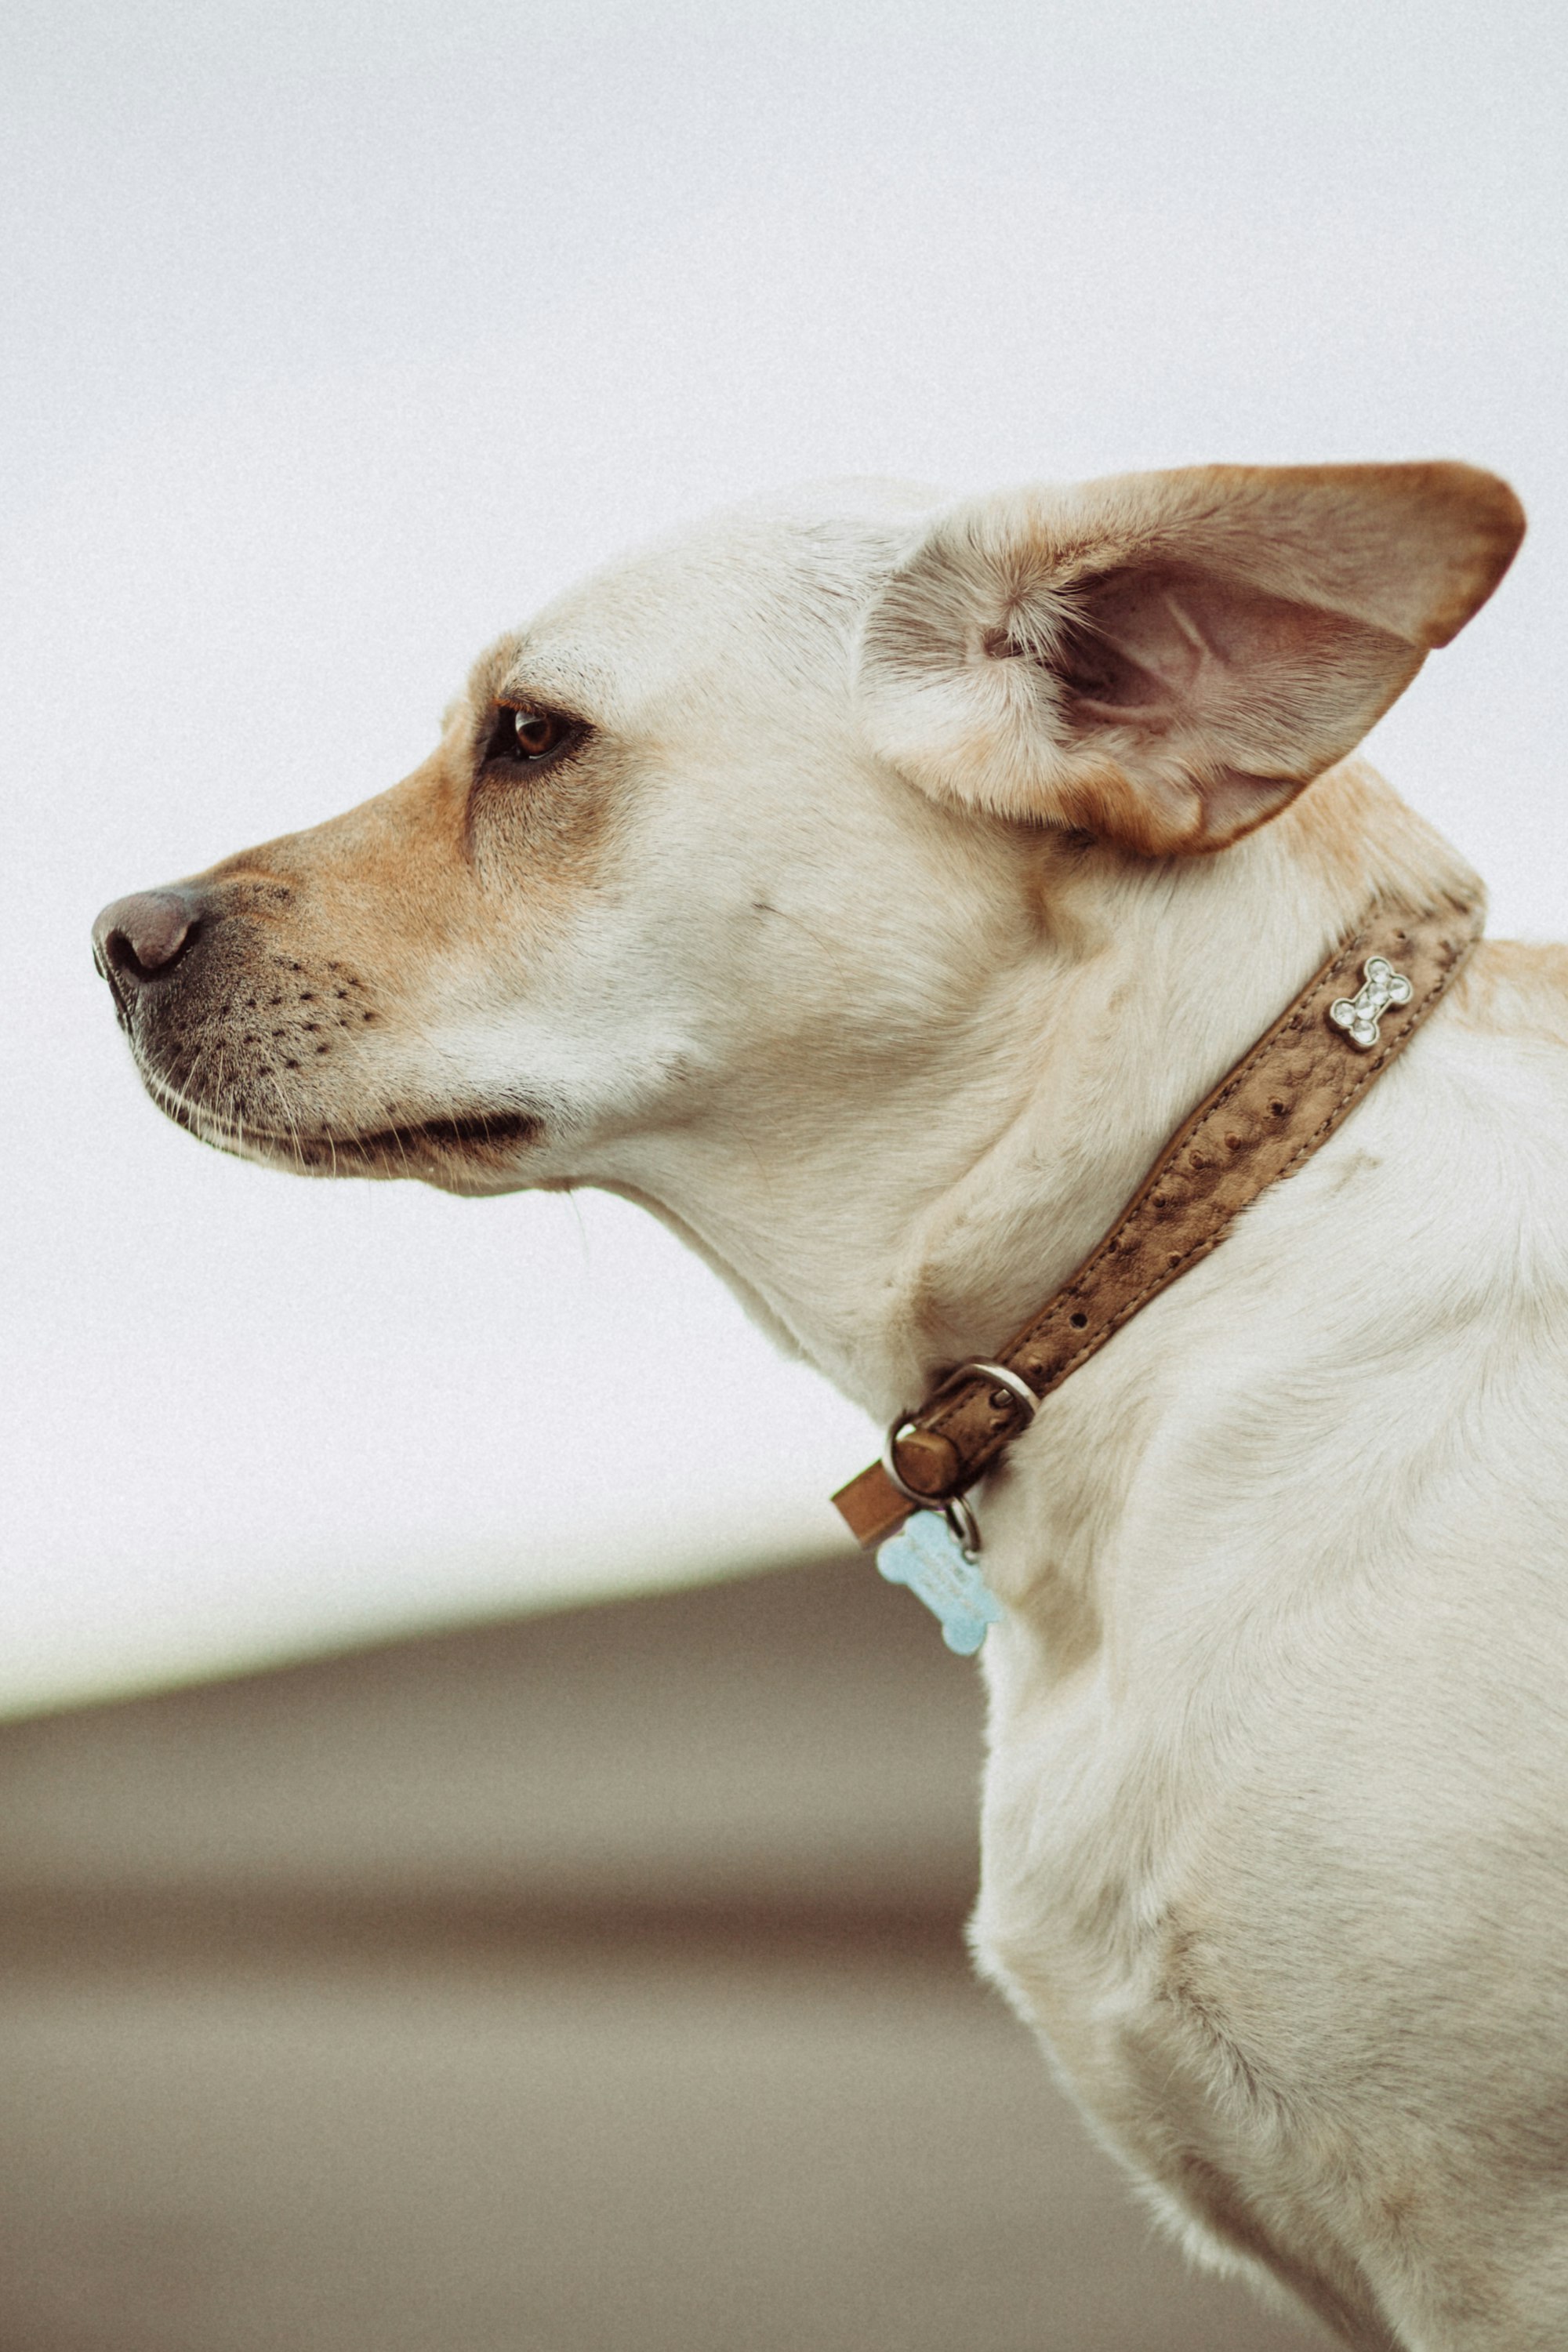 What materials work best for dog collars